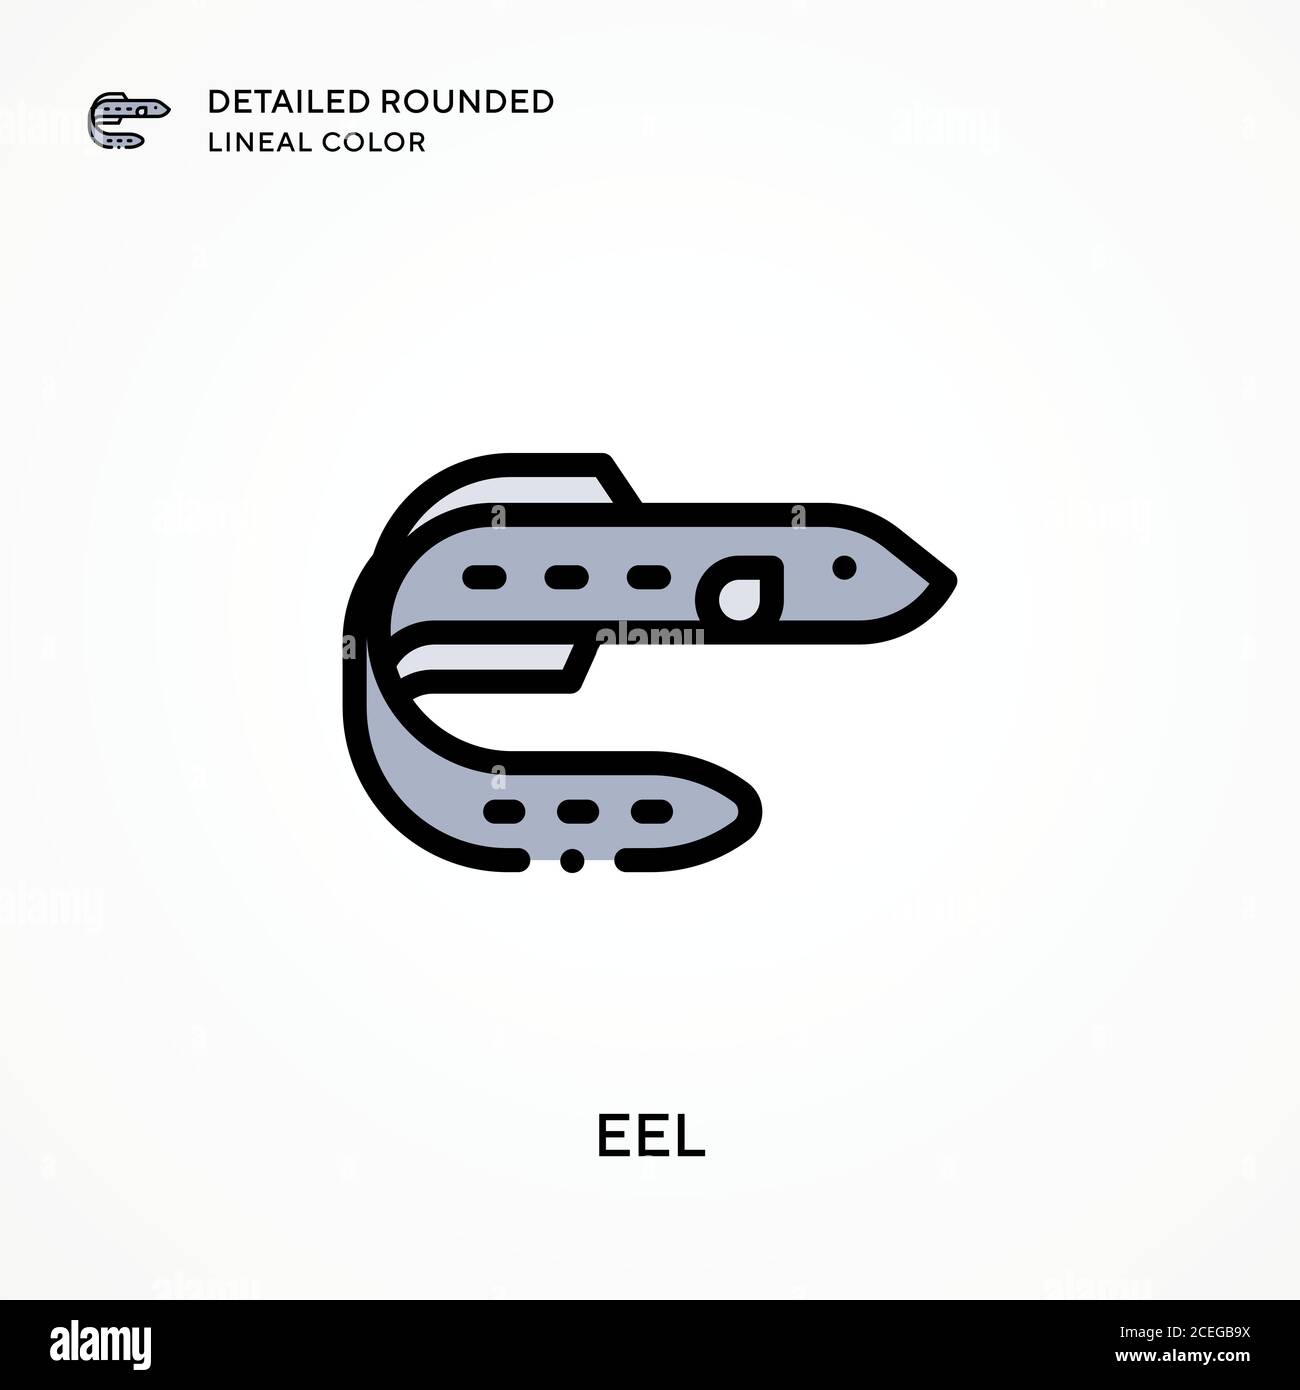 Eel detailed rounded lineal color. Modern vector illustration concepts. Easy to edit and customize. Stock Vector